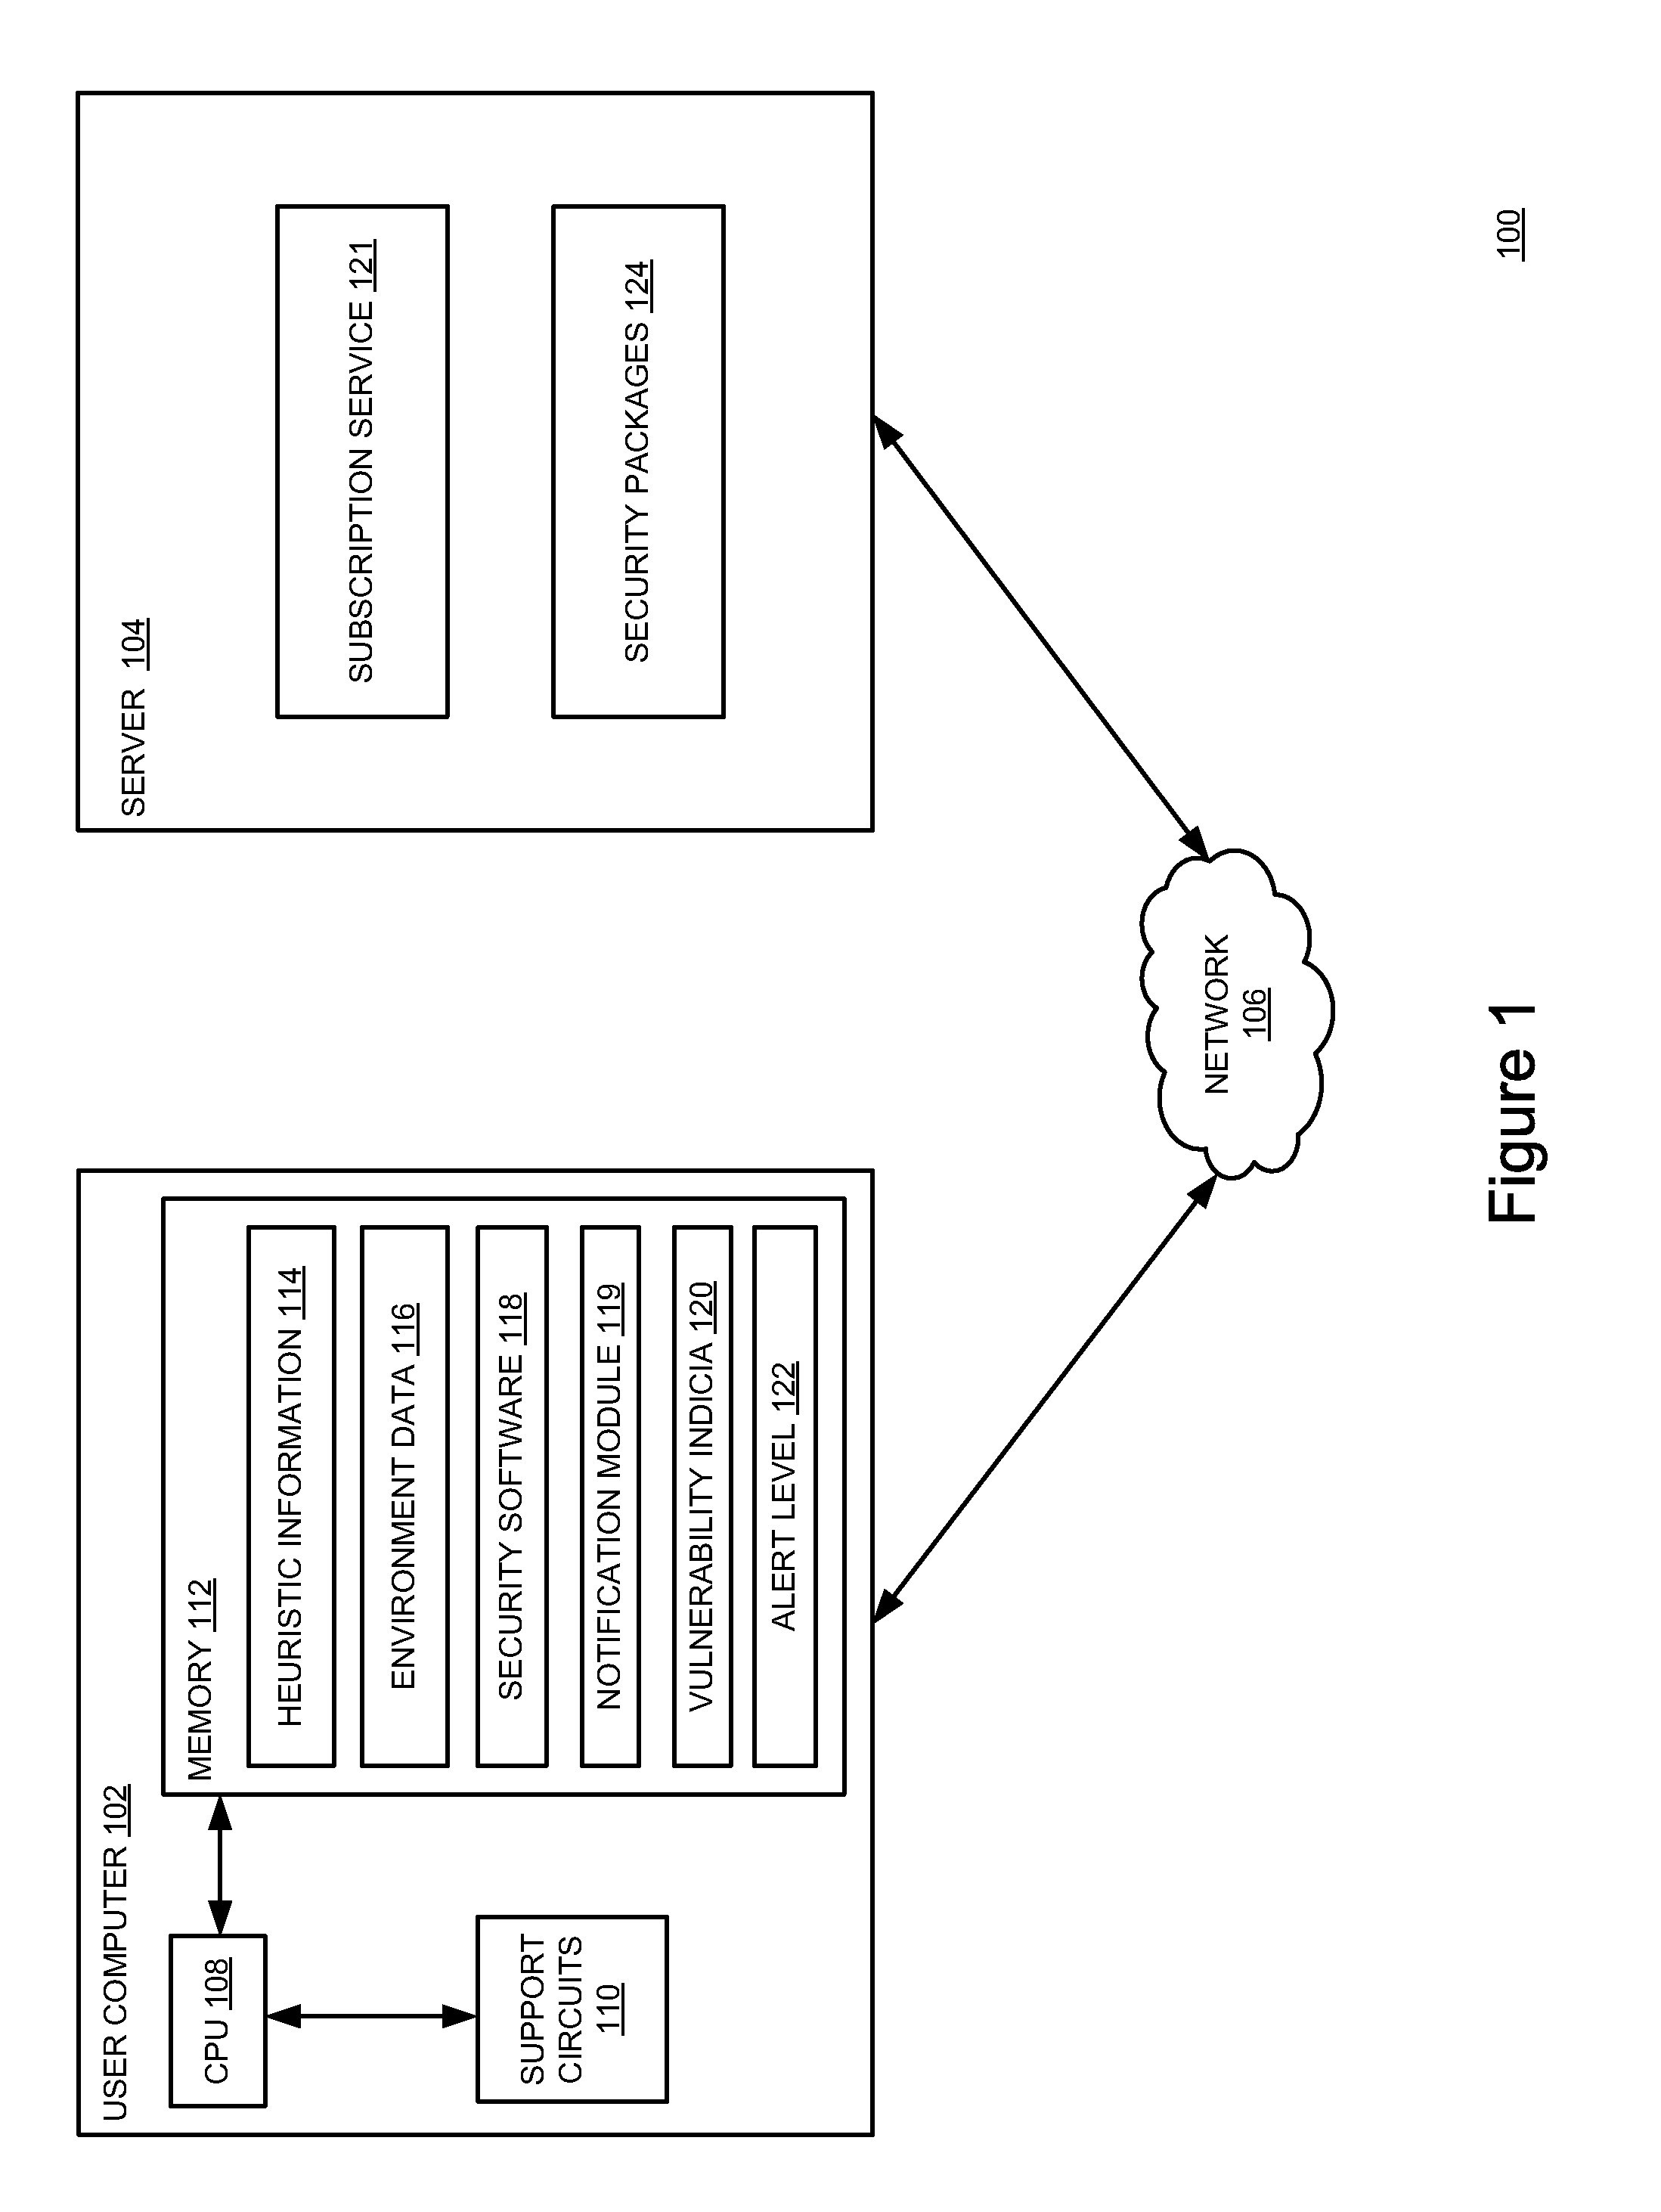 Method and apparatus for managing an alert level for notifying a user as to threats to a computer